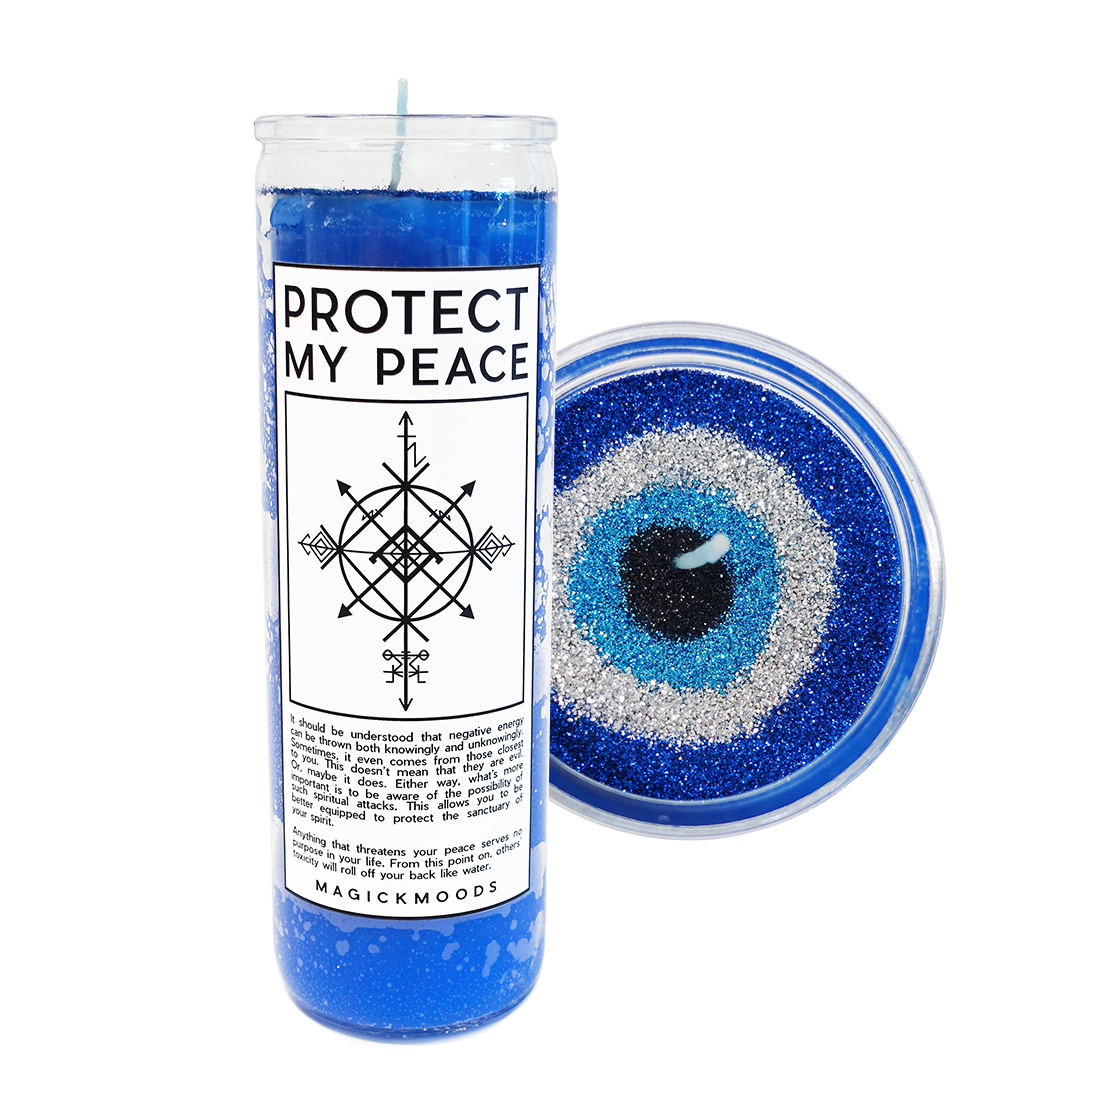 Protect My Peace 7-Day Meditation Candle - PREORDER - Ships by Feb 26th, 2024